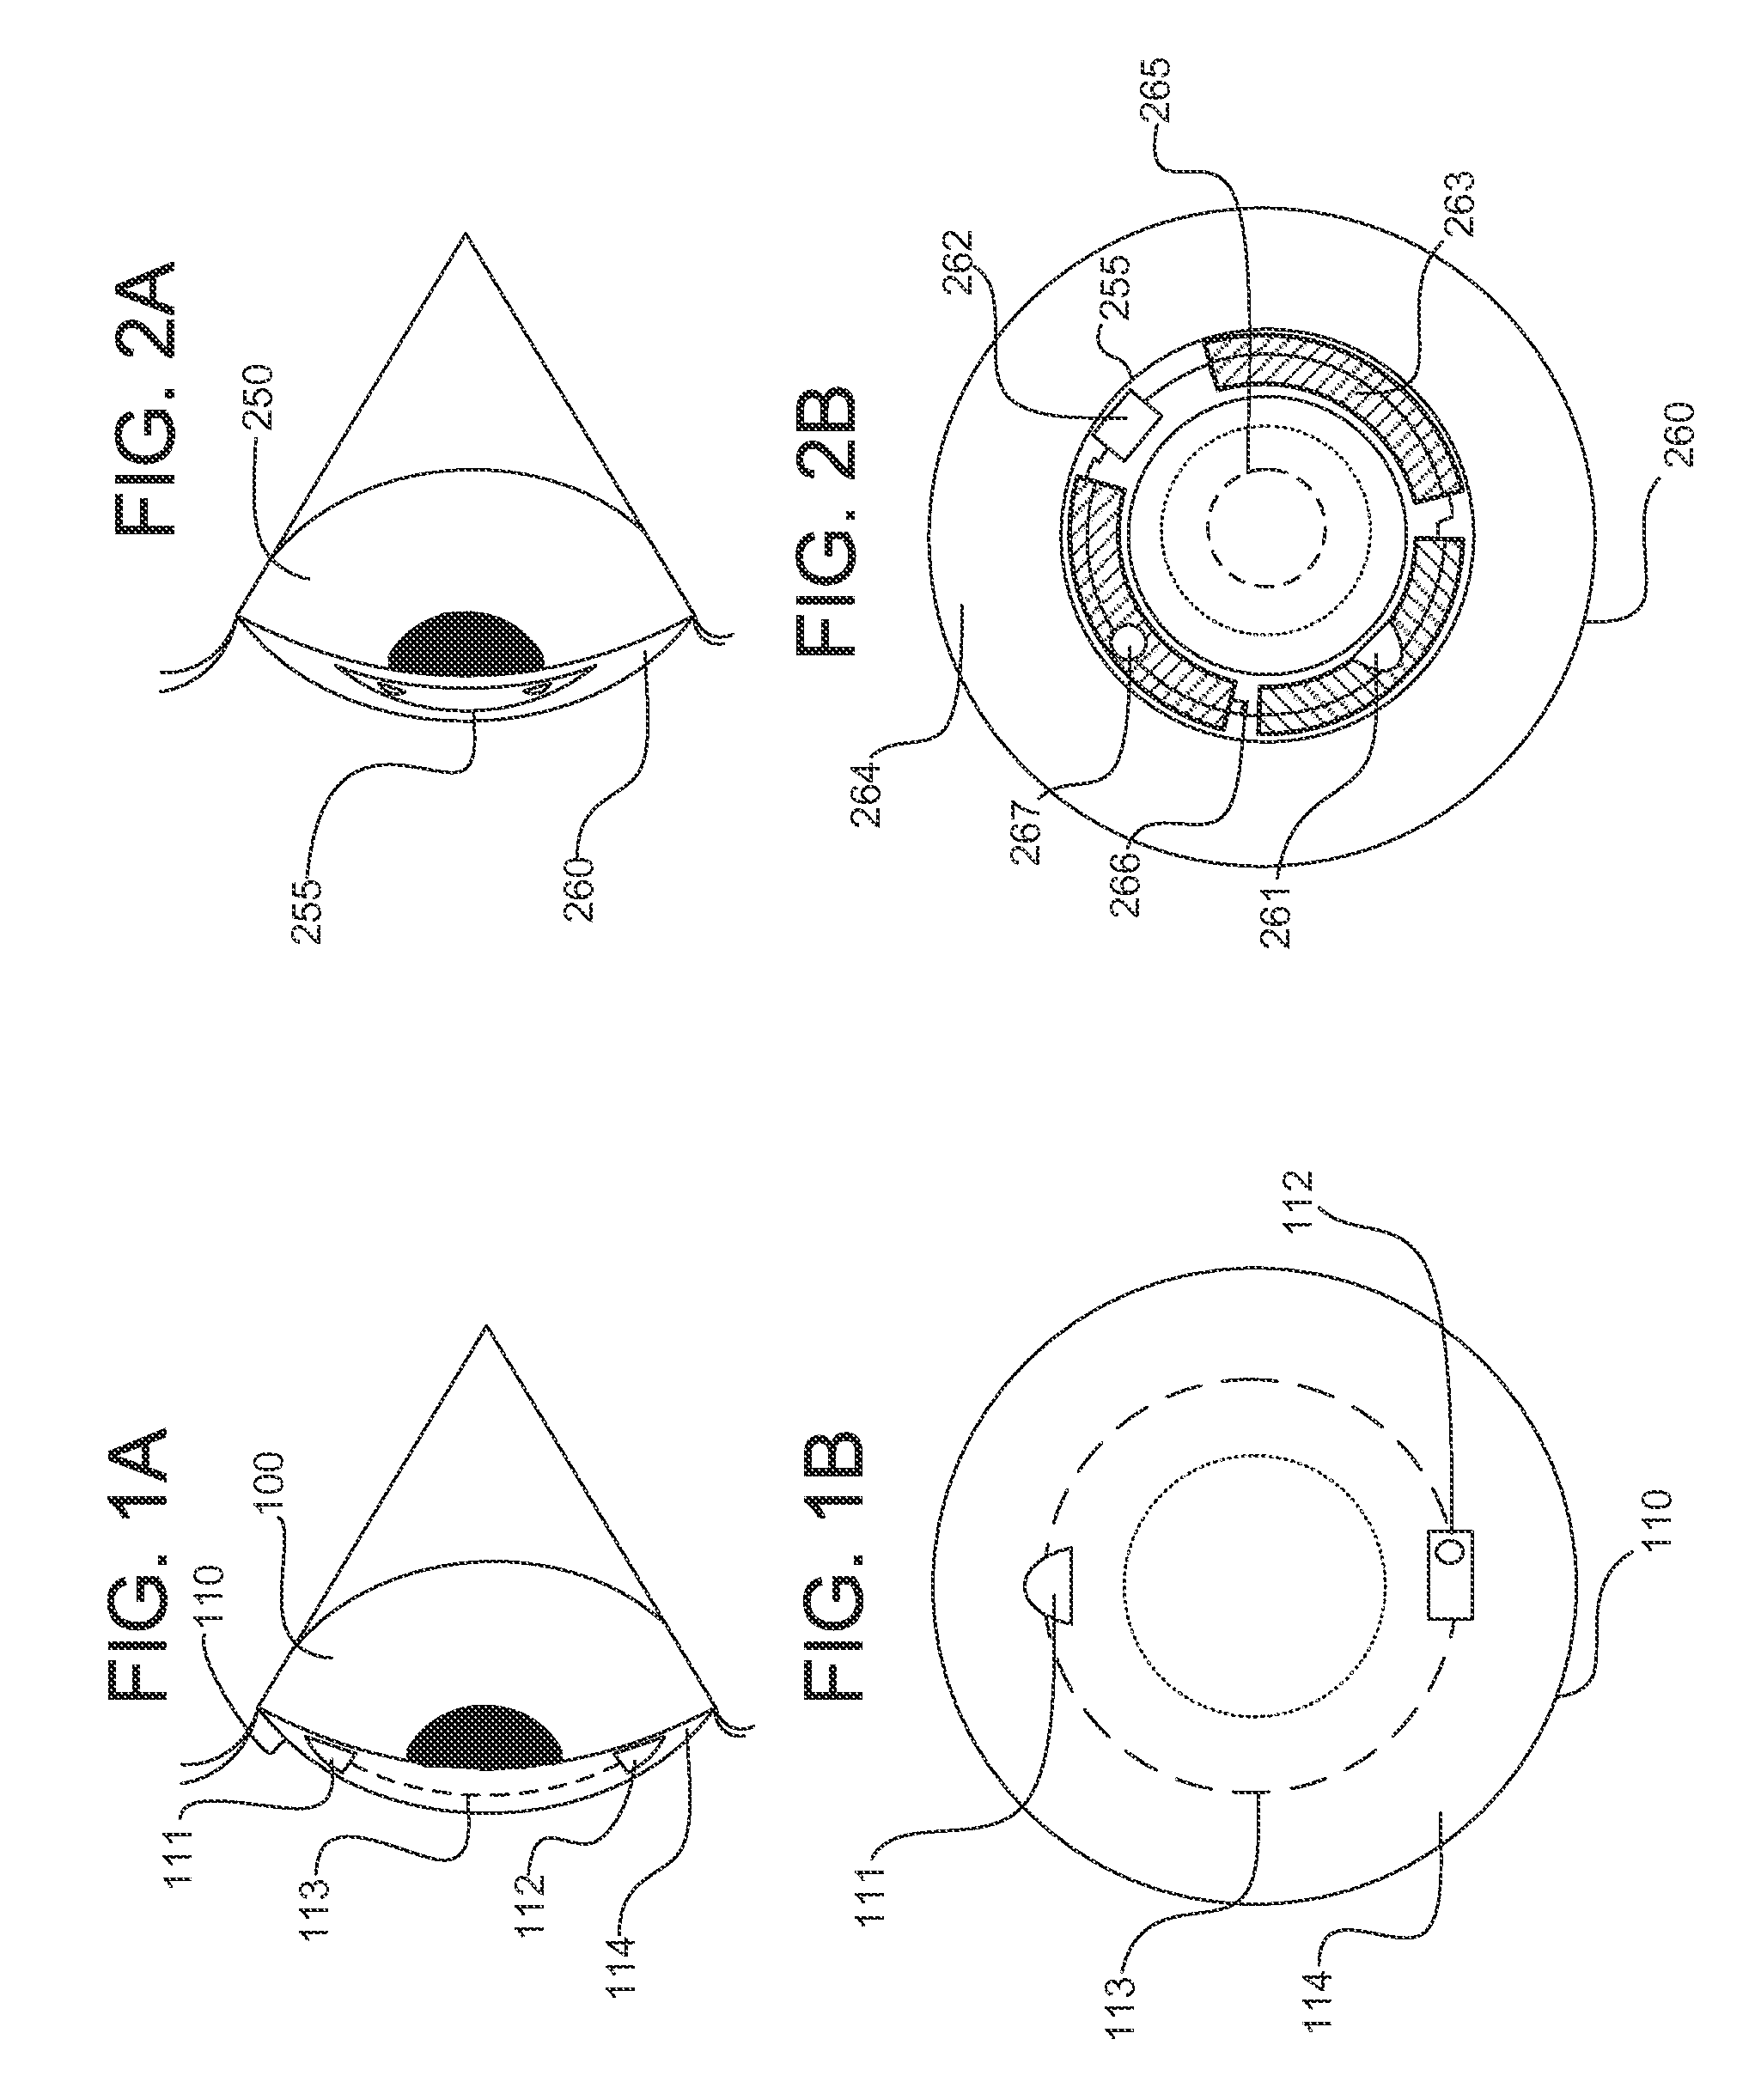 Ophthalmic lens system capable of interfacing with an external device